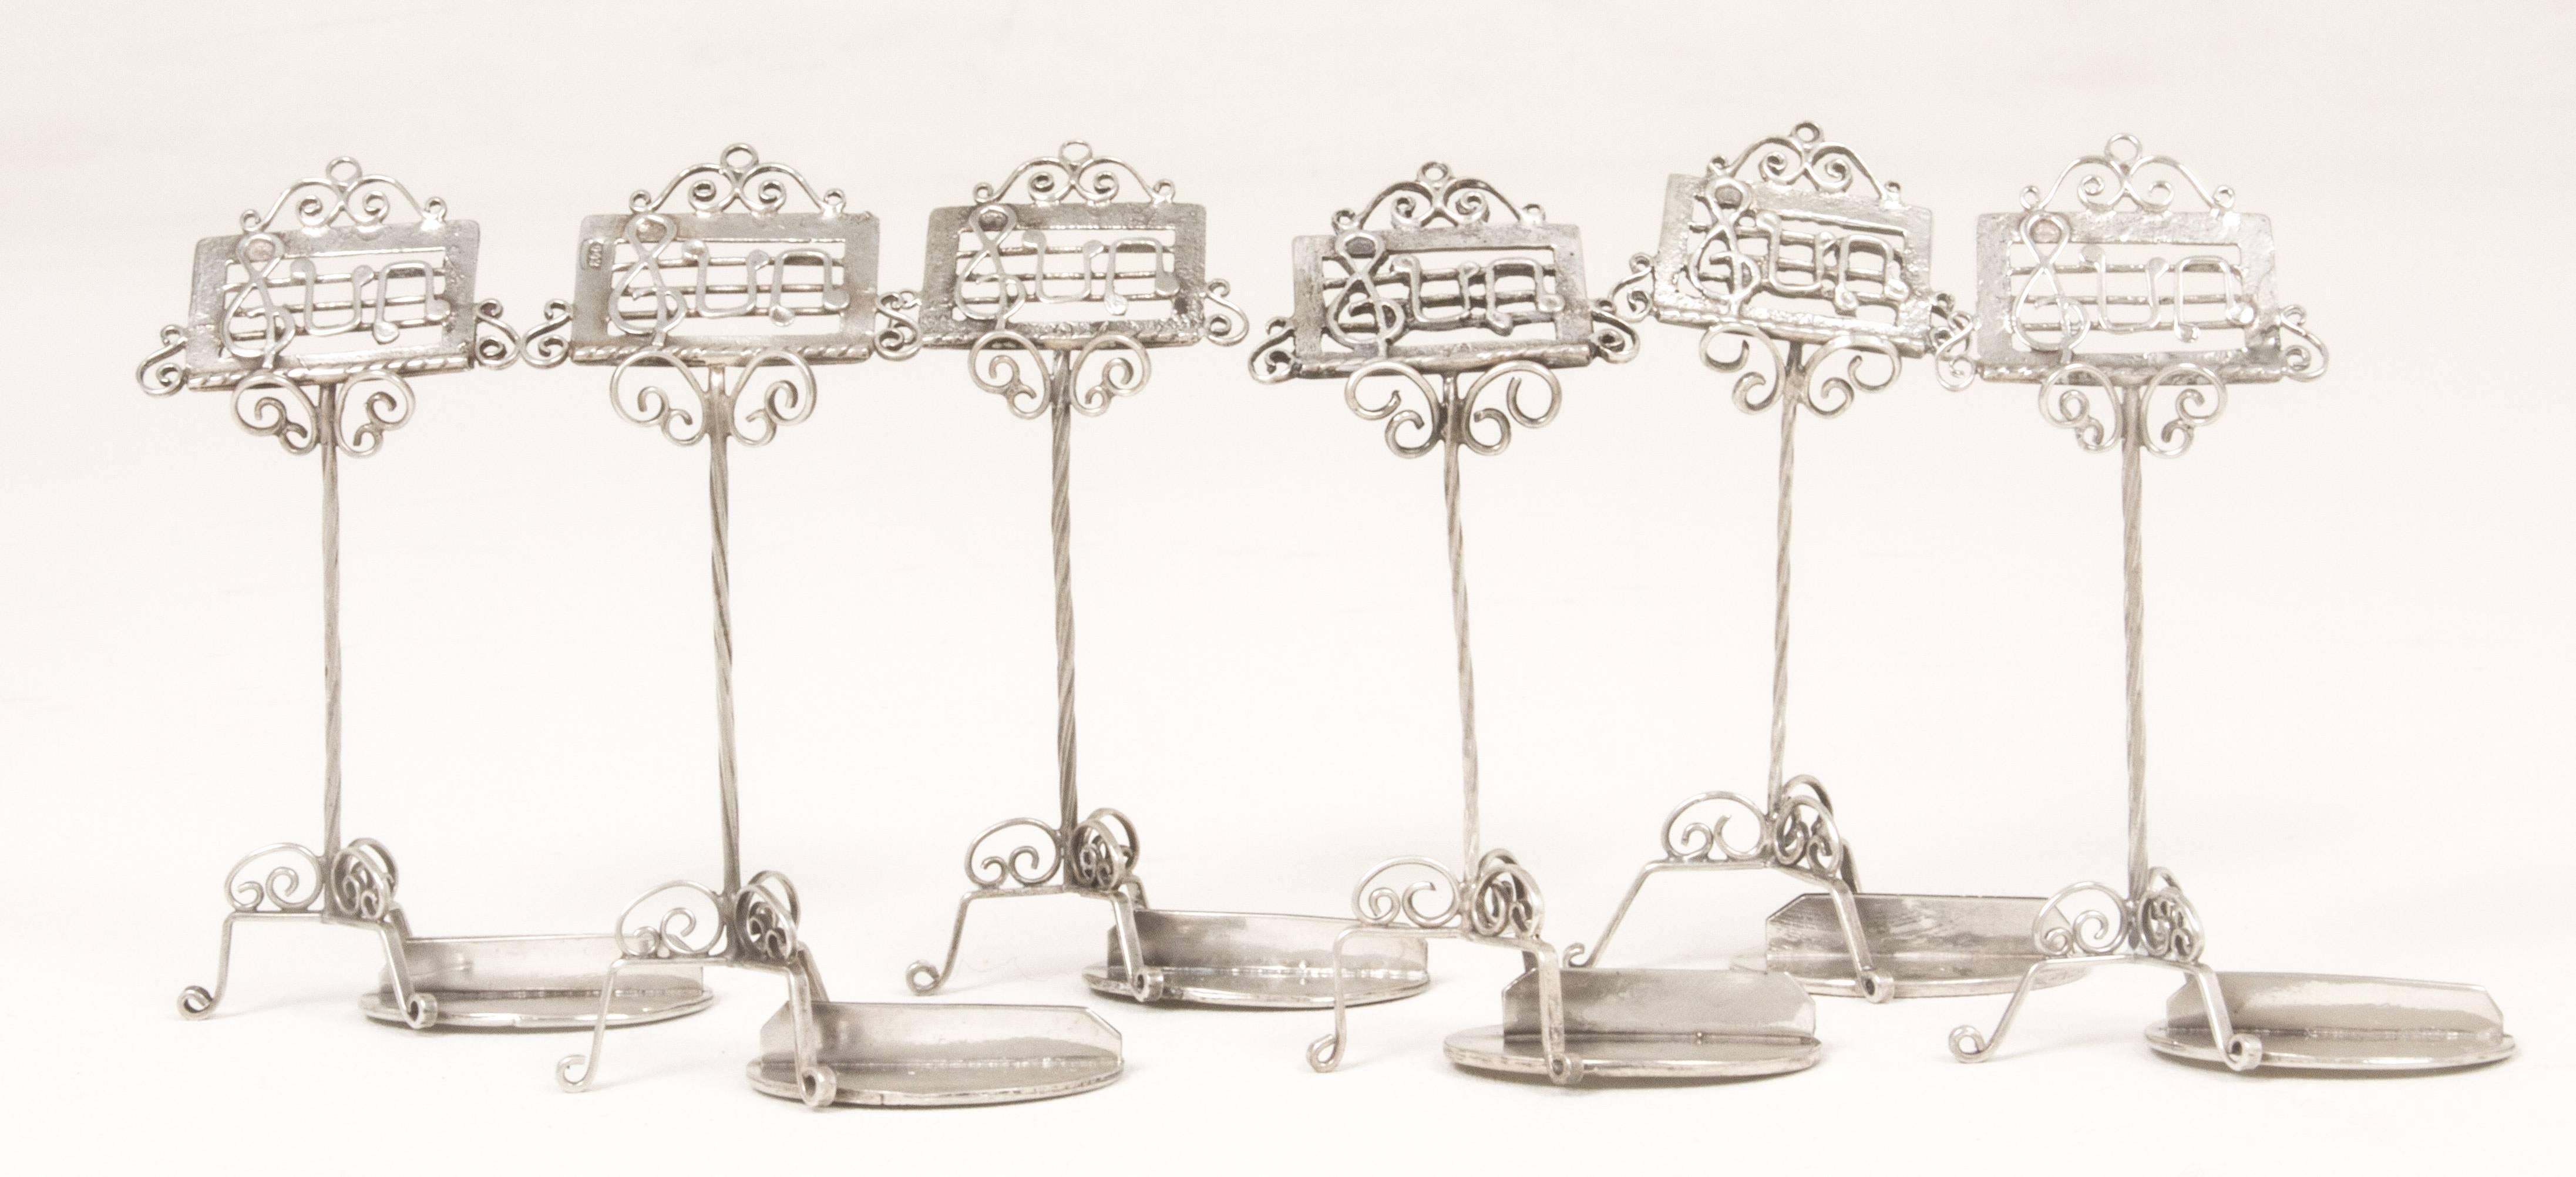 These are whimsical, nicely made music stand place card holders.